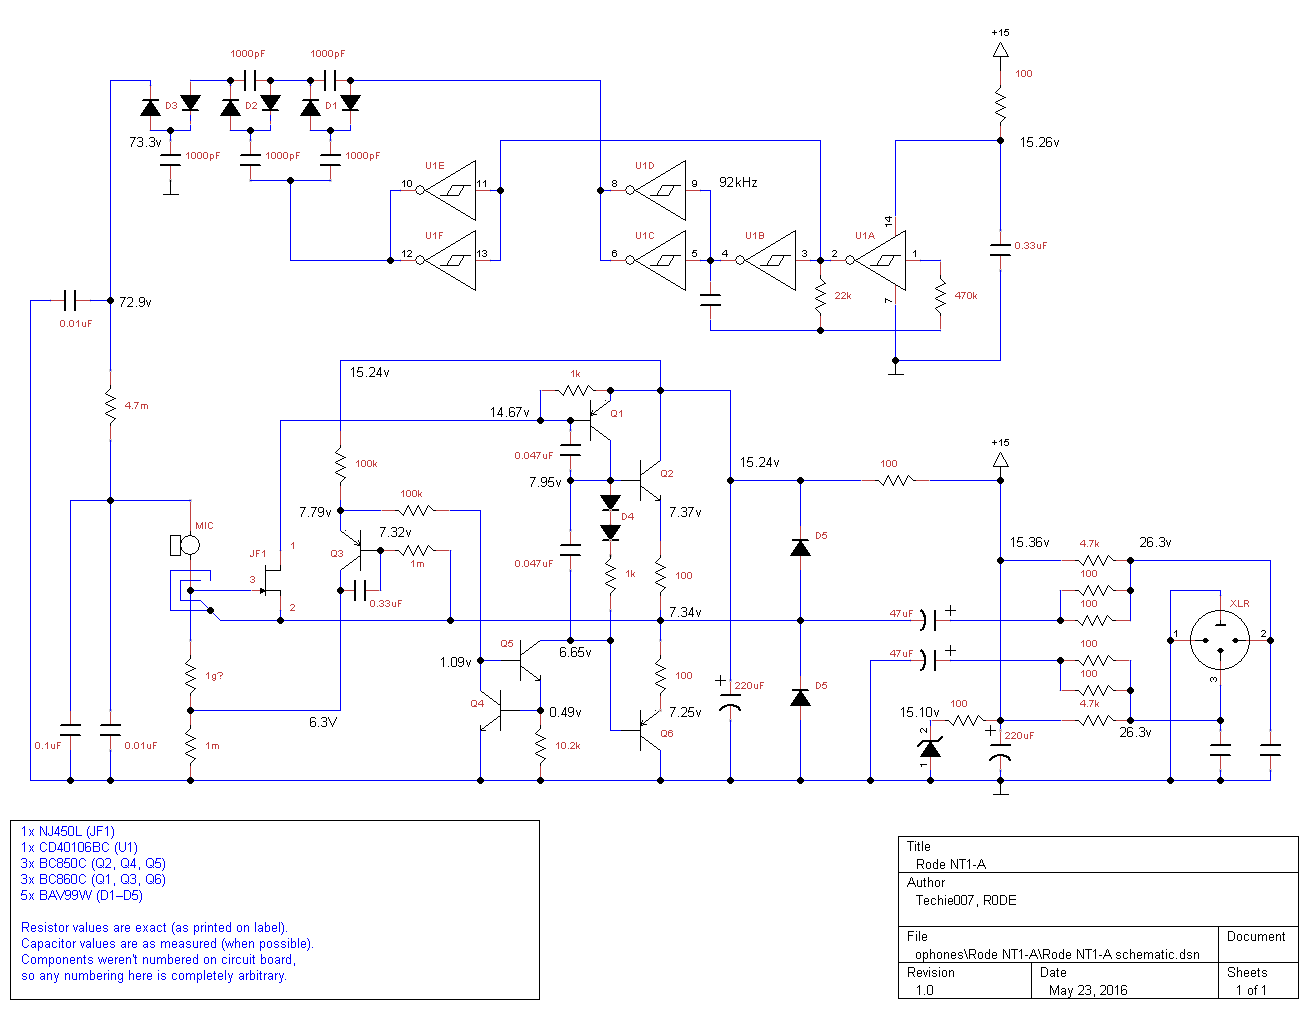 Rode NT1-A schematic.png